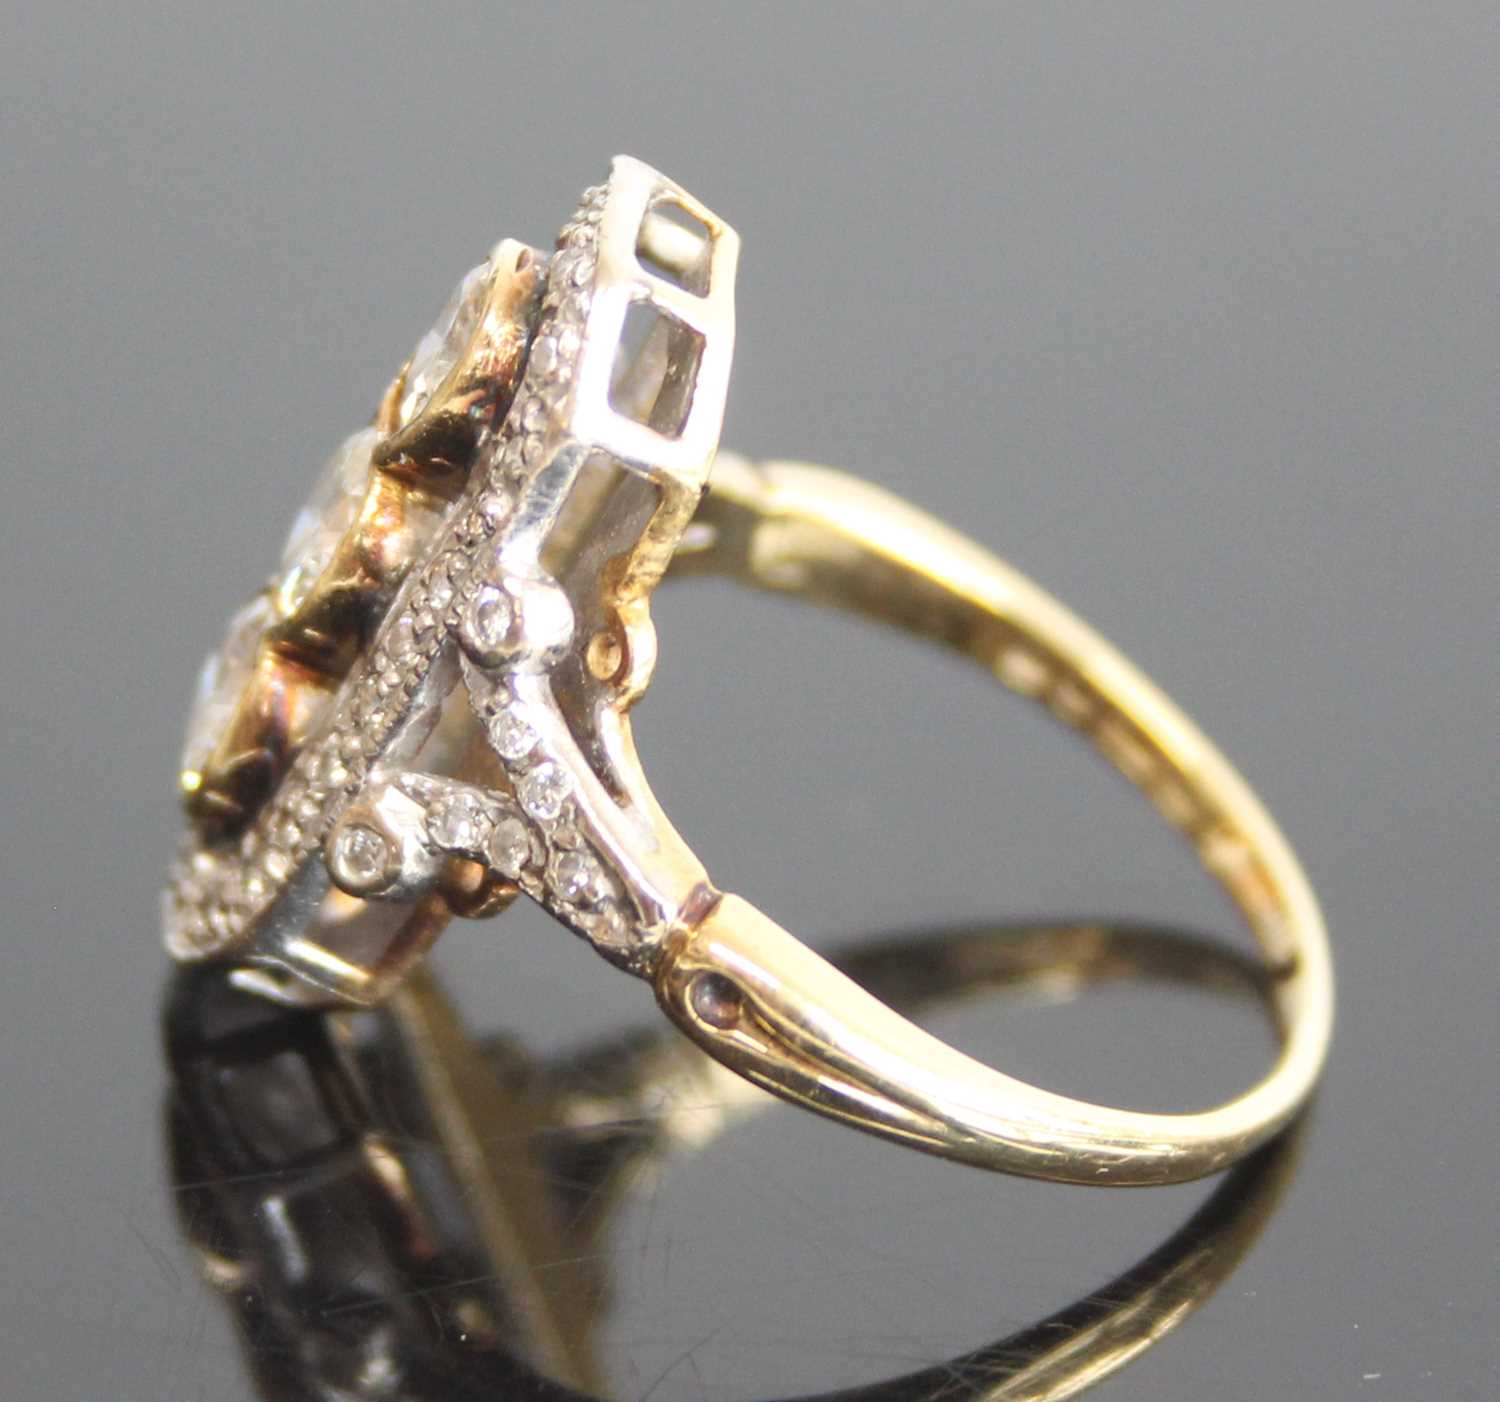 An 18ct yellow and white gold Art Deco style panel ring comprising 3 round brilliant cut diamonds in - Image 5 of 7